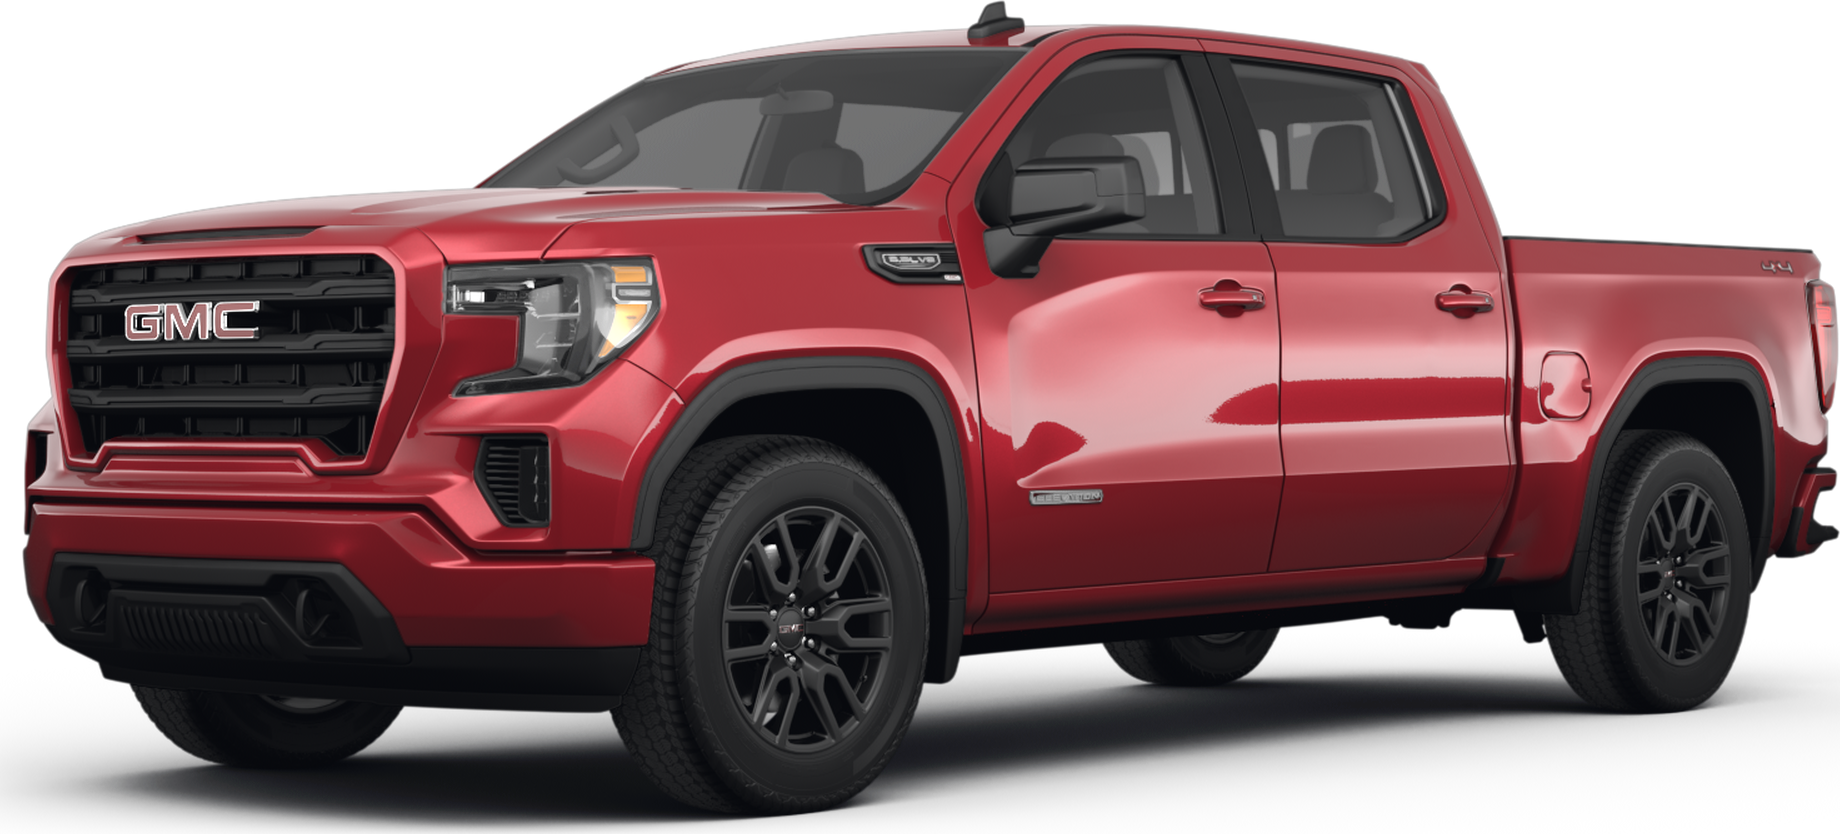 2022 Gmc Sierra 1500 Limited Crew Cab Price Value Ratings And Reviews